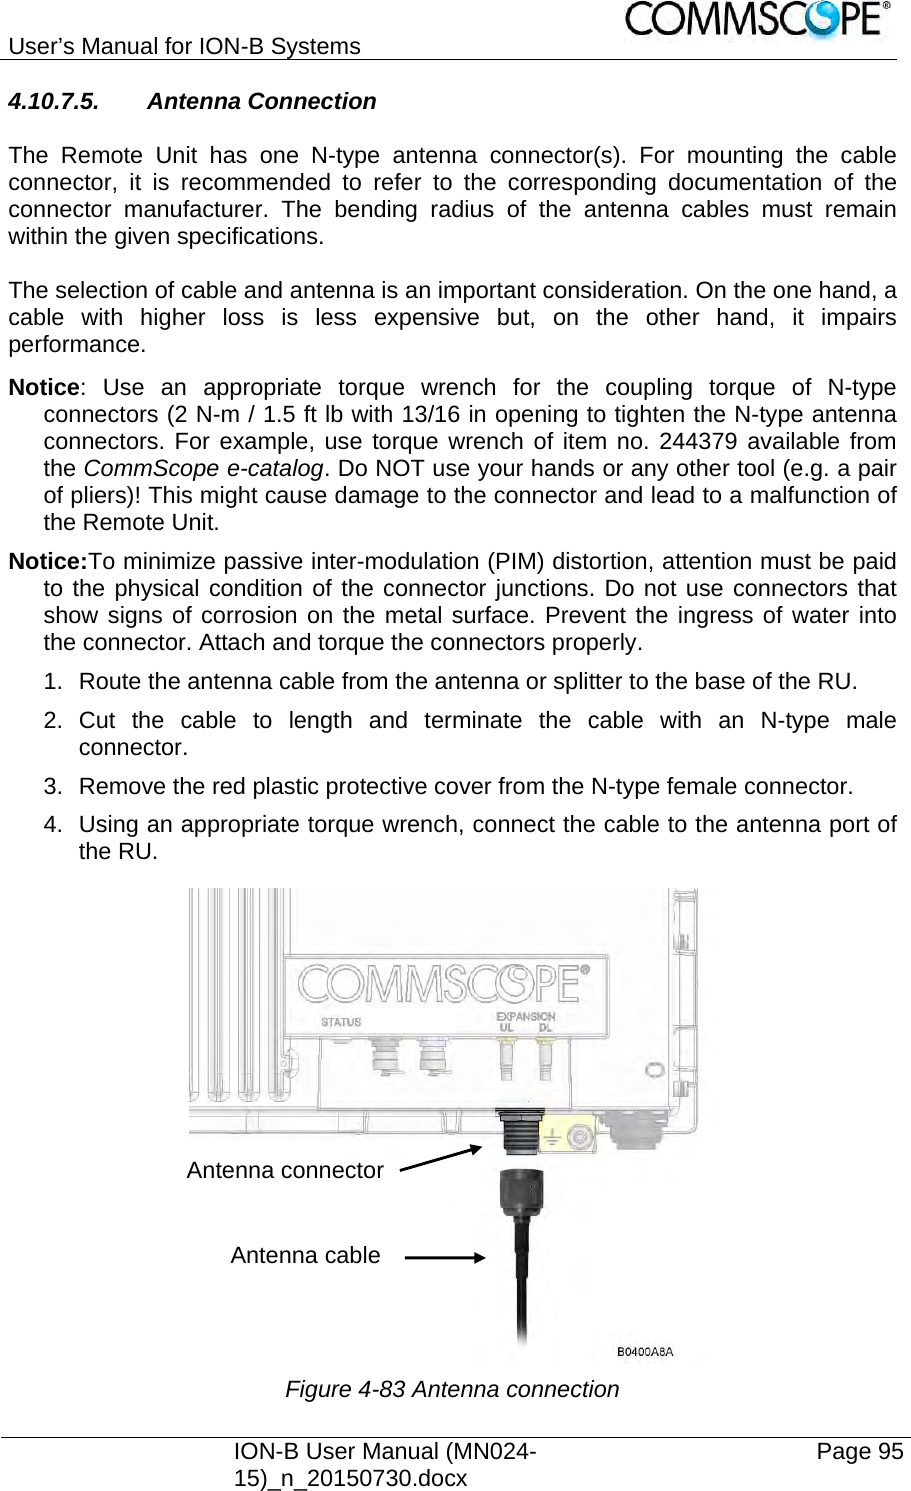 User’s Manual for ION-B Systems    ION-B User Manual (MN024-15)_n_20150730.docx  Page 95 4.10.7.5. Antenna Connection  The Remote Unit has one N-type antenna connector(s). For mounting the cable connector, it is recommended to refer to the corresponding documentation of the connector manufacturer. The bending radius of the antenna cables must remain within the given specifications.  The selection of cable and antenna is an important consideration. On the one hand, a cable with higher loss is less expensive but, on the other hand, it impairs performance.  Notice: Use an appropriate torque wrench for the coupling torque of N-type connectors (2 N-m / 1.5 ft lb with 13/16 in opening to tighten the N-type antenna connectors. For example, use torque wrench of item no. 244379 available from the CommScope e-catalog. Do NOT use your hands or any other tool (e.g. a pair of pliers)! This might cause damage to the connector and lead to a malfunction of the Remote Unit. Notice:To minimize passive inter-modulation (PIM) distortion, attention must be paid to the physical condition of the connector junctions. Do not use connectors that show signs of corrosion on the metal surface. Prevent the ingress of water into the connector. Attach and torque the connectors properly. 1.  Route the antenna cable from the antenna or splitter to the base of the RU. 2. Cut the cable to length and terminate the cable with an N-type male connector. 3.  Remove the red plastic protective cover from the N-type female connector. 4.  Using an appropriate torque wrench, connect the cable to the antenna port of the RU.  Figure 4-83 Antenna connection Antenna connector Antenna cable 